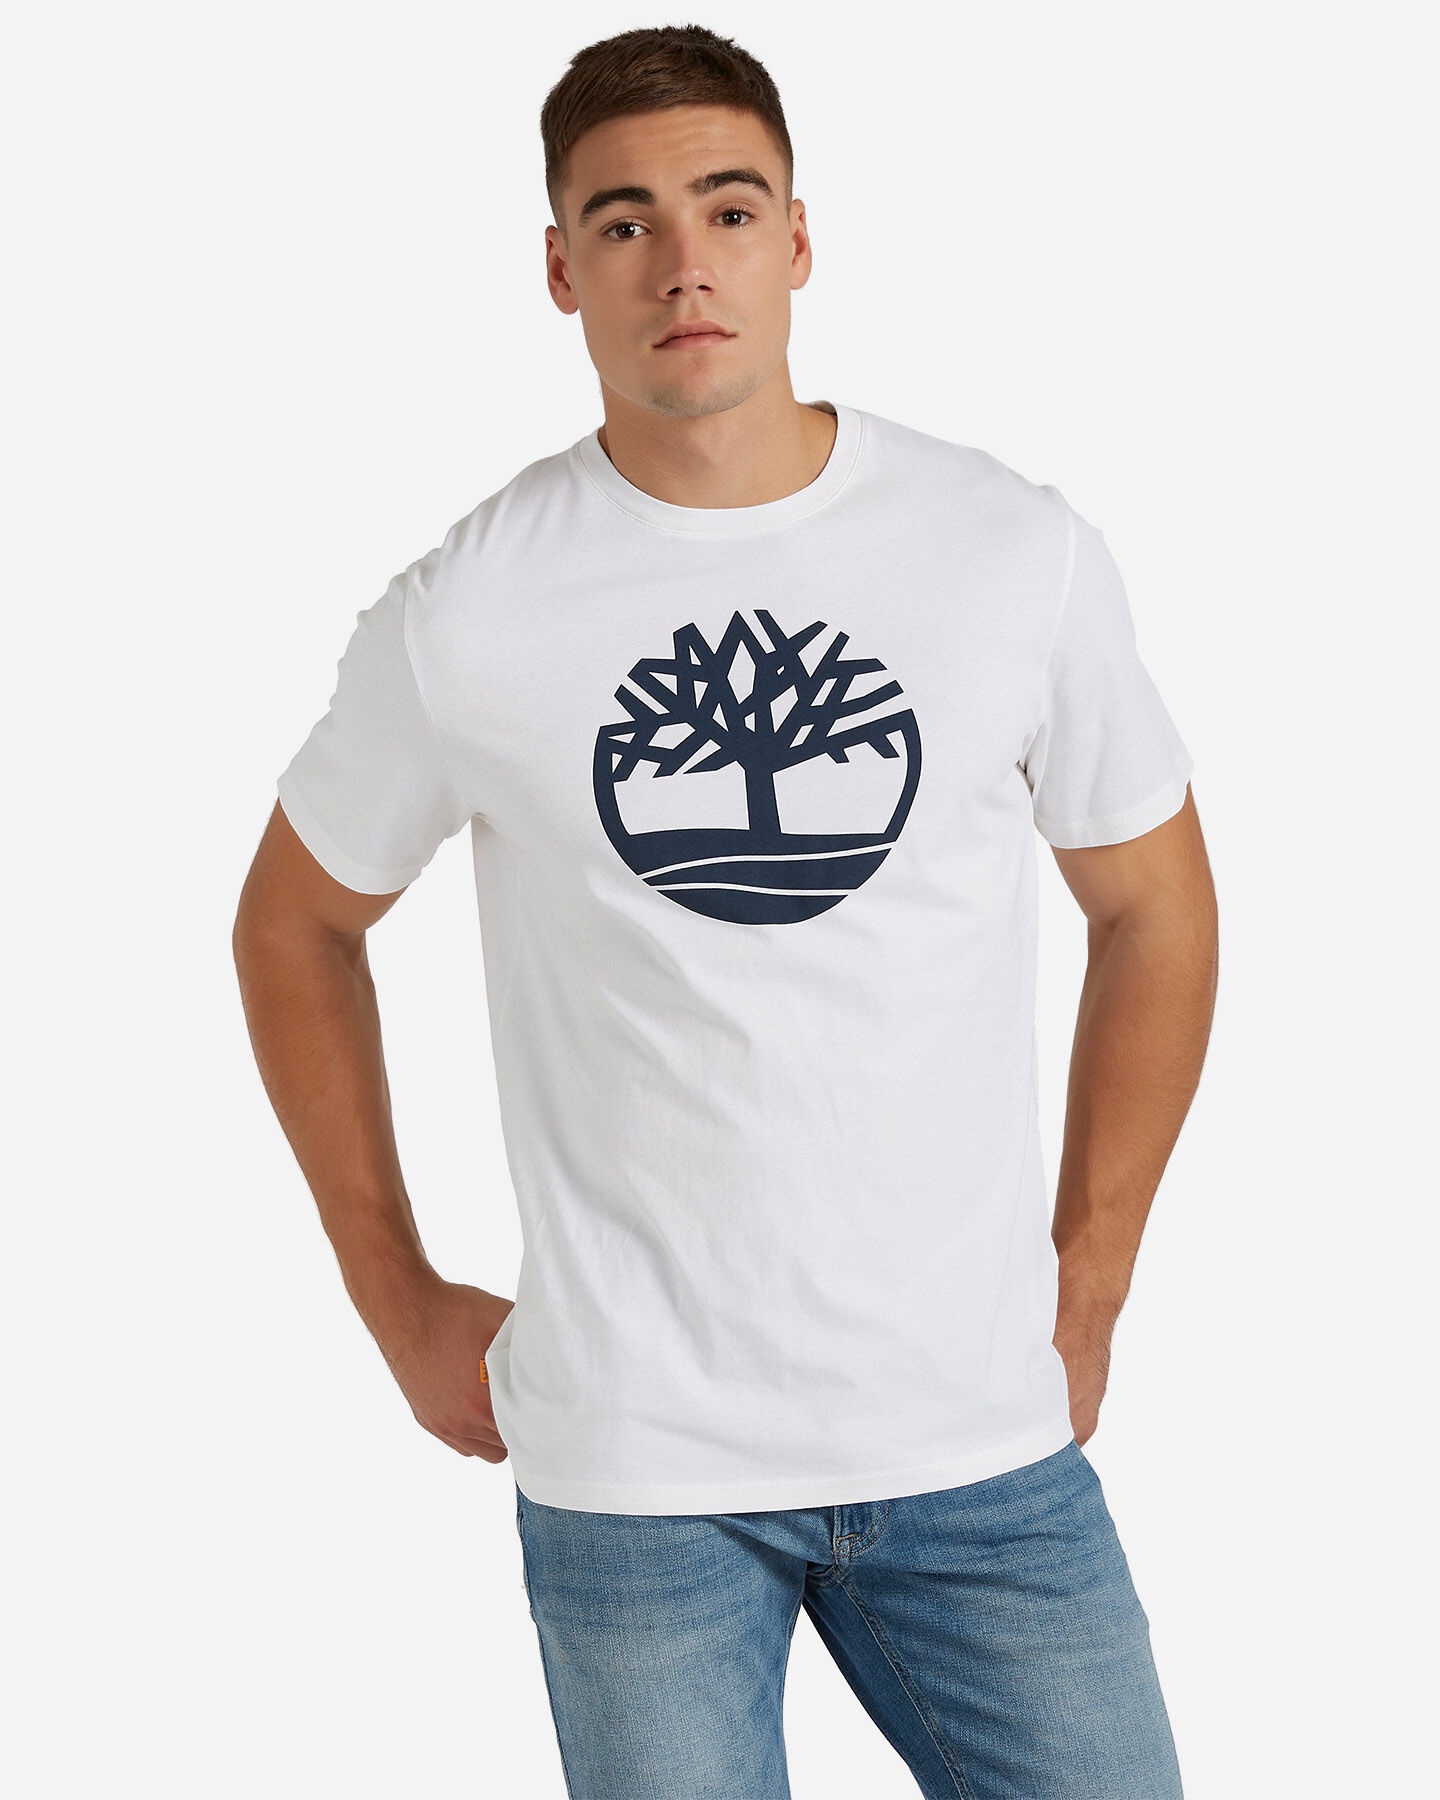  T-Shirt TIMBERLAND MC KENNEBEC M S4083663|1001|S scatto 0